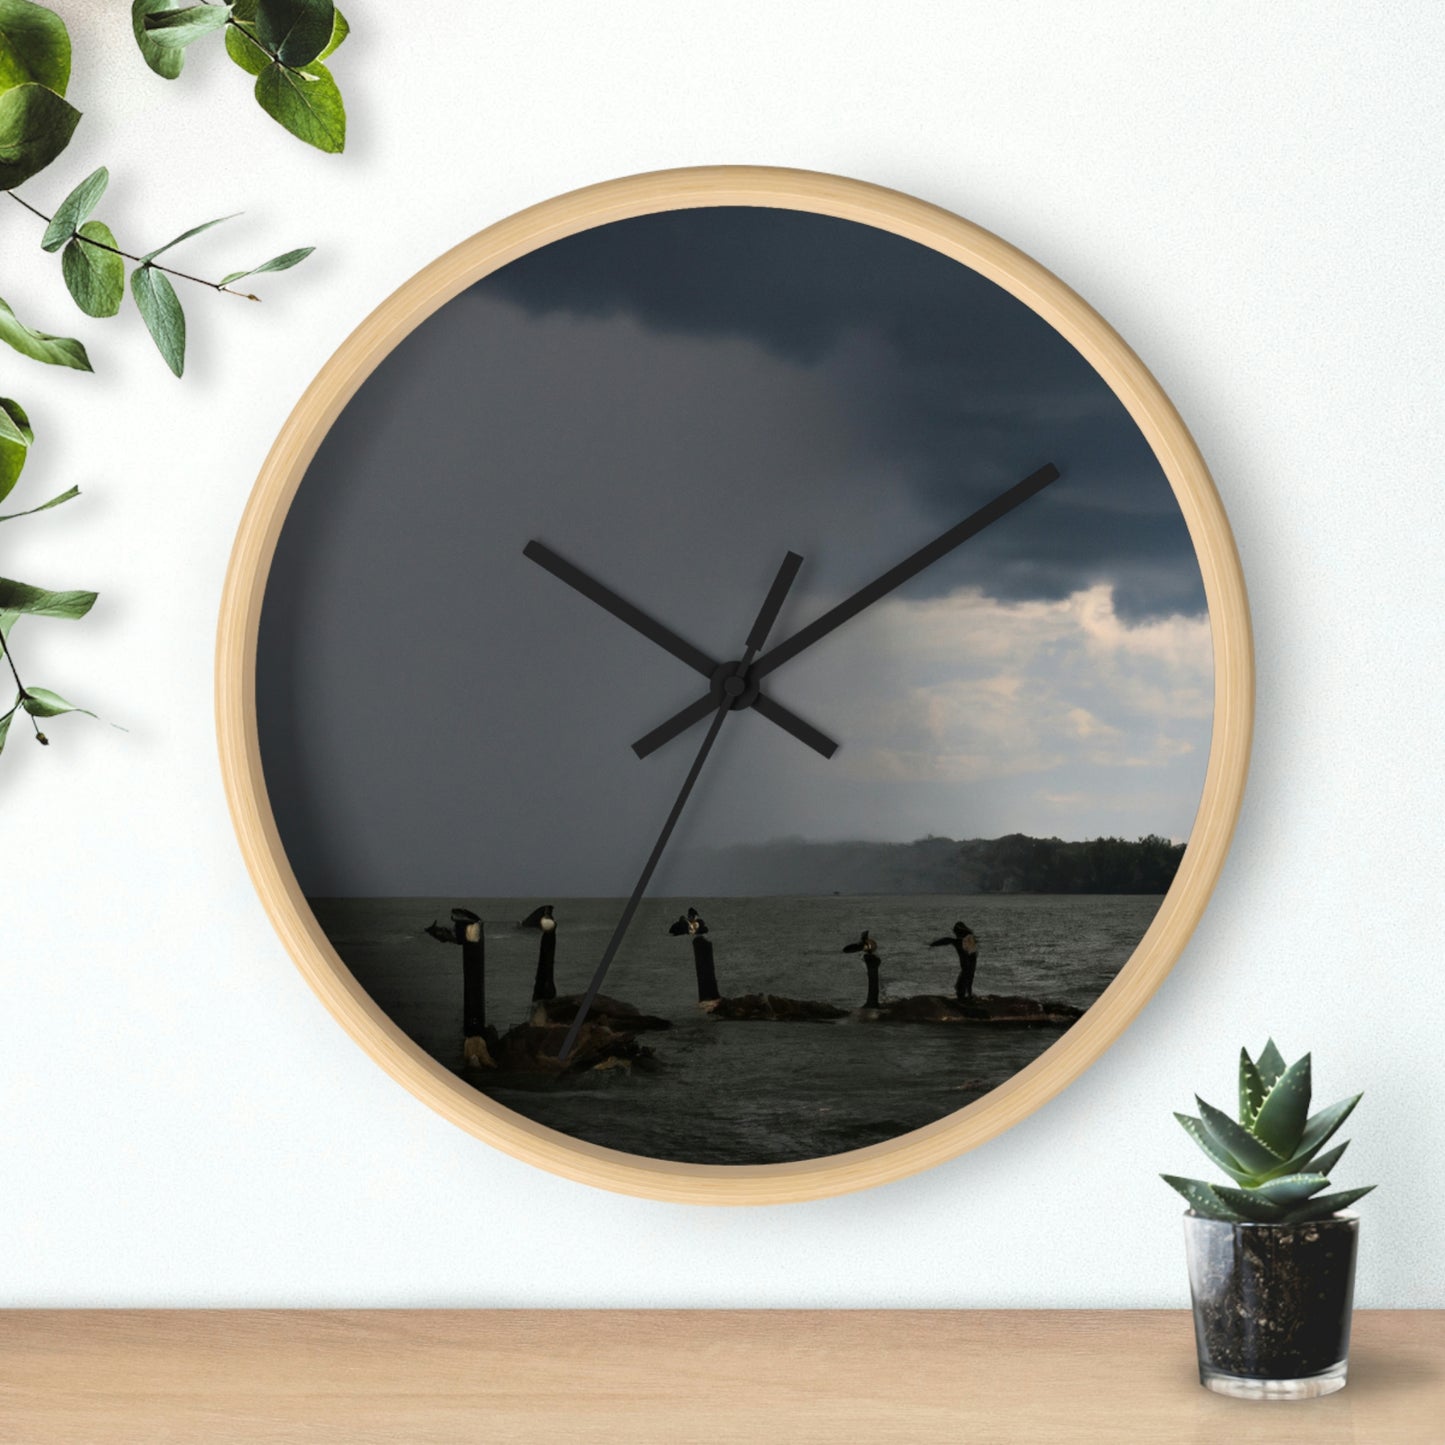 "The Unstoppable Tempest" - The Alien Wall Clock